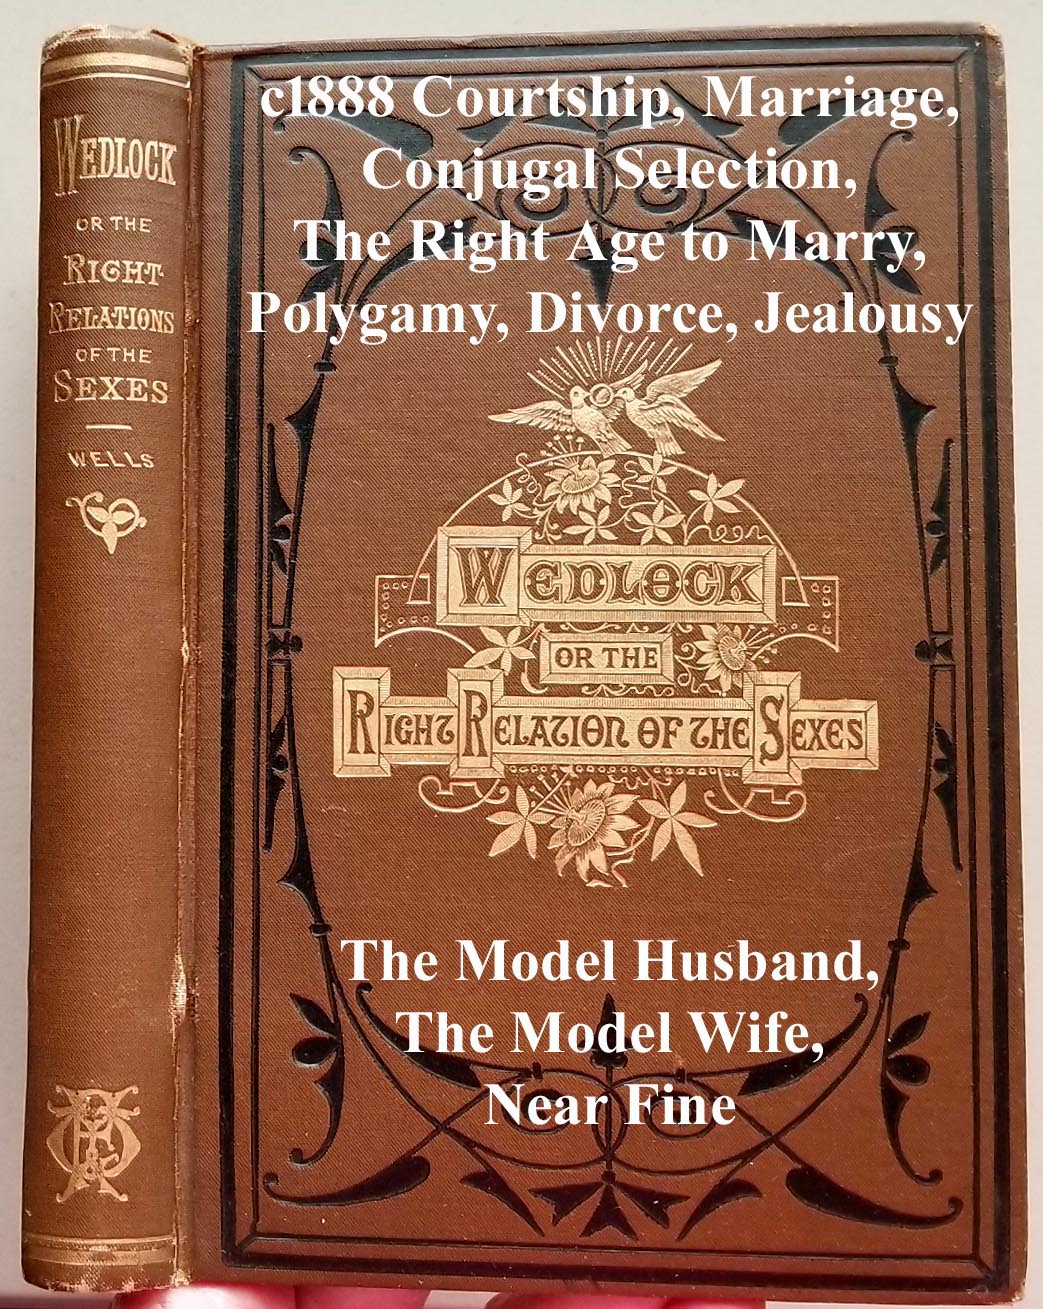 Wedlock Right Relations of the Sexes antique book 1